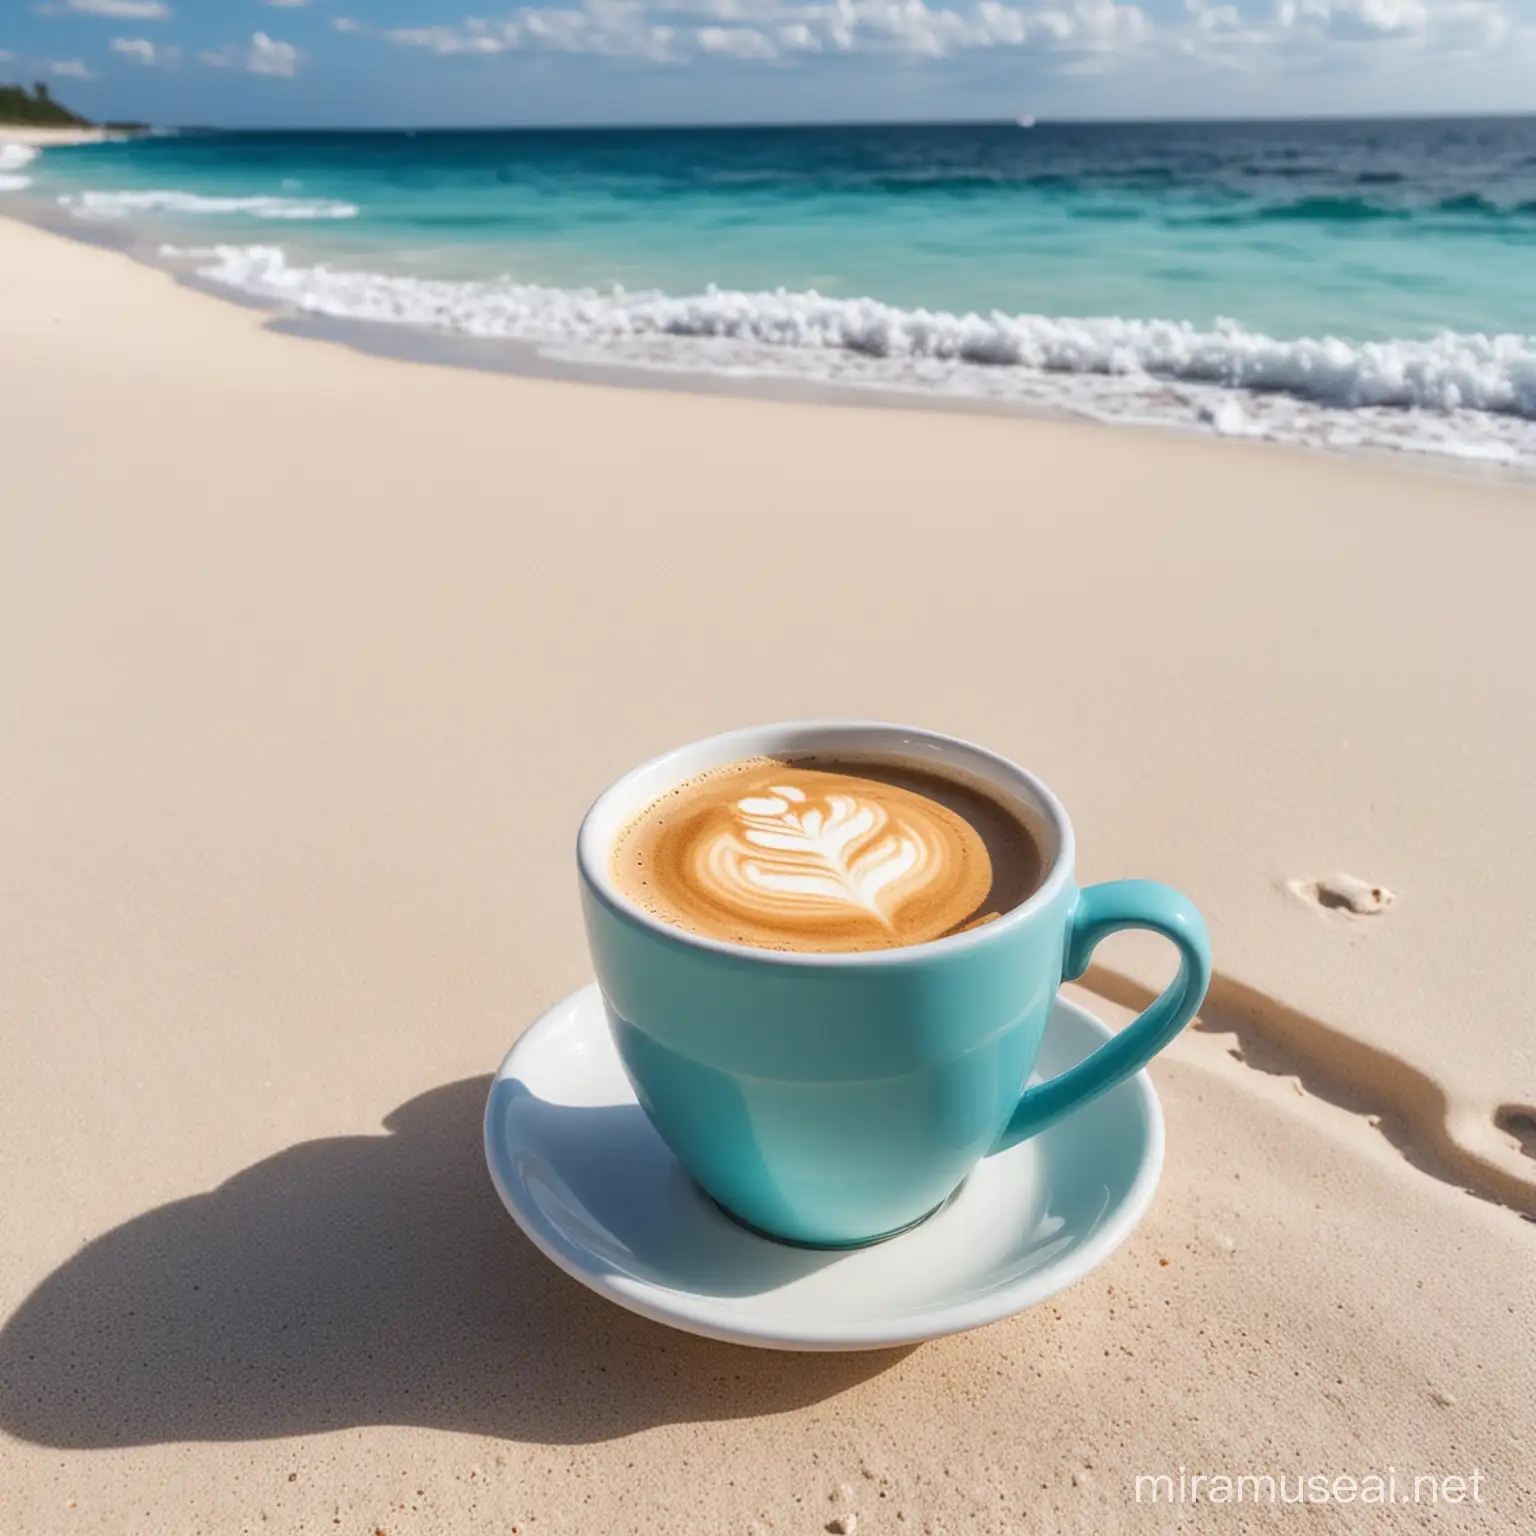 Beautiful russian drink Coffee sipping it while enjoying the sightseing of blue ocean with soft white sand beach